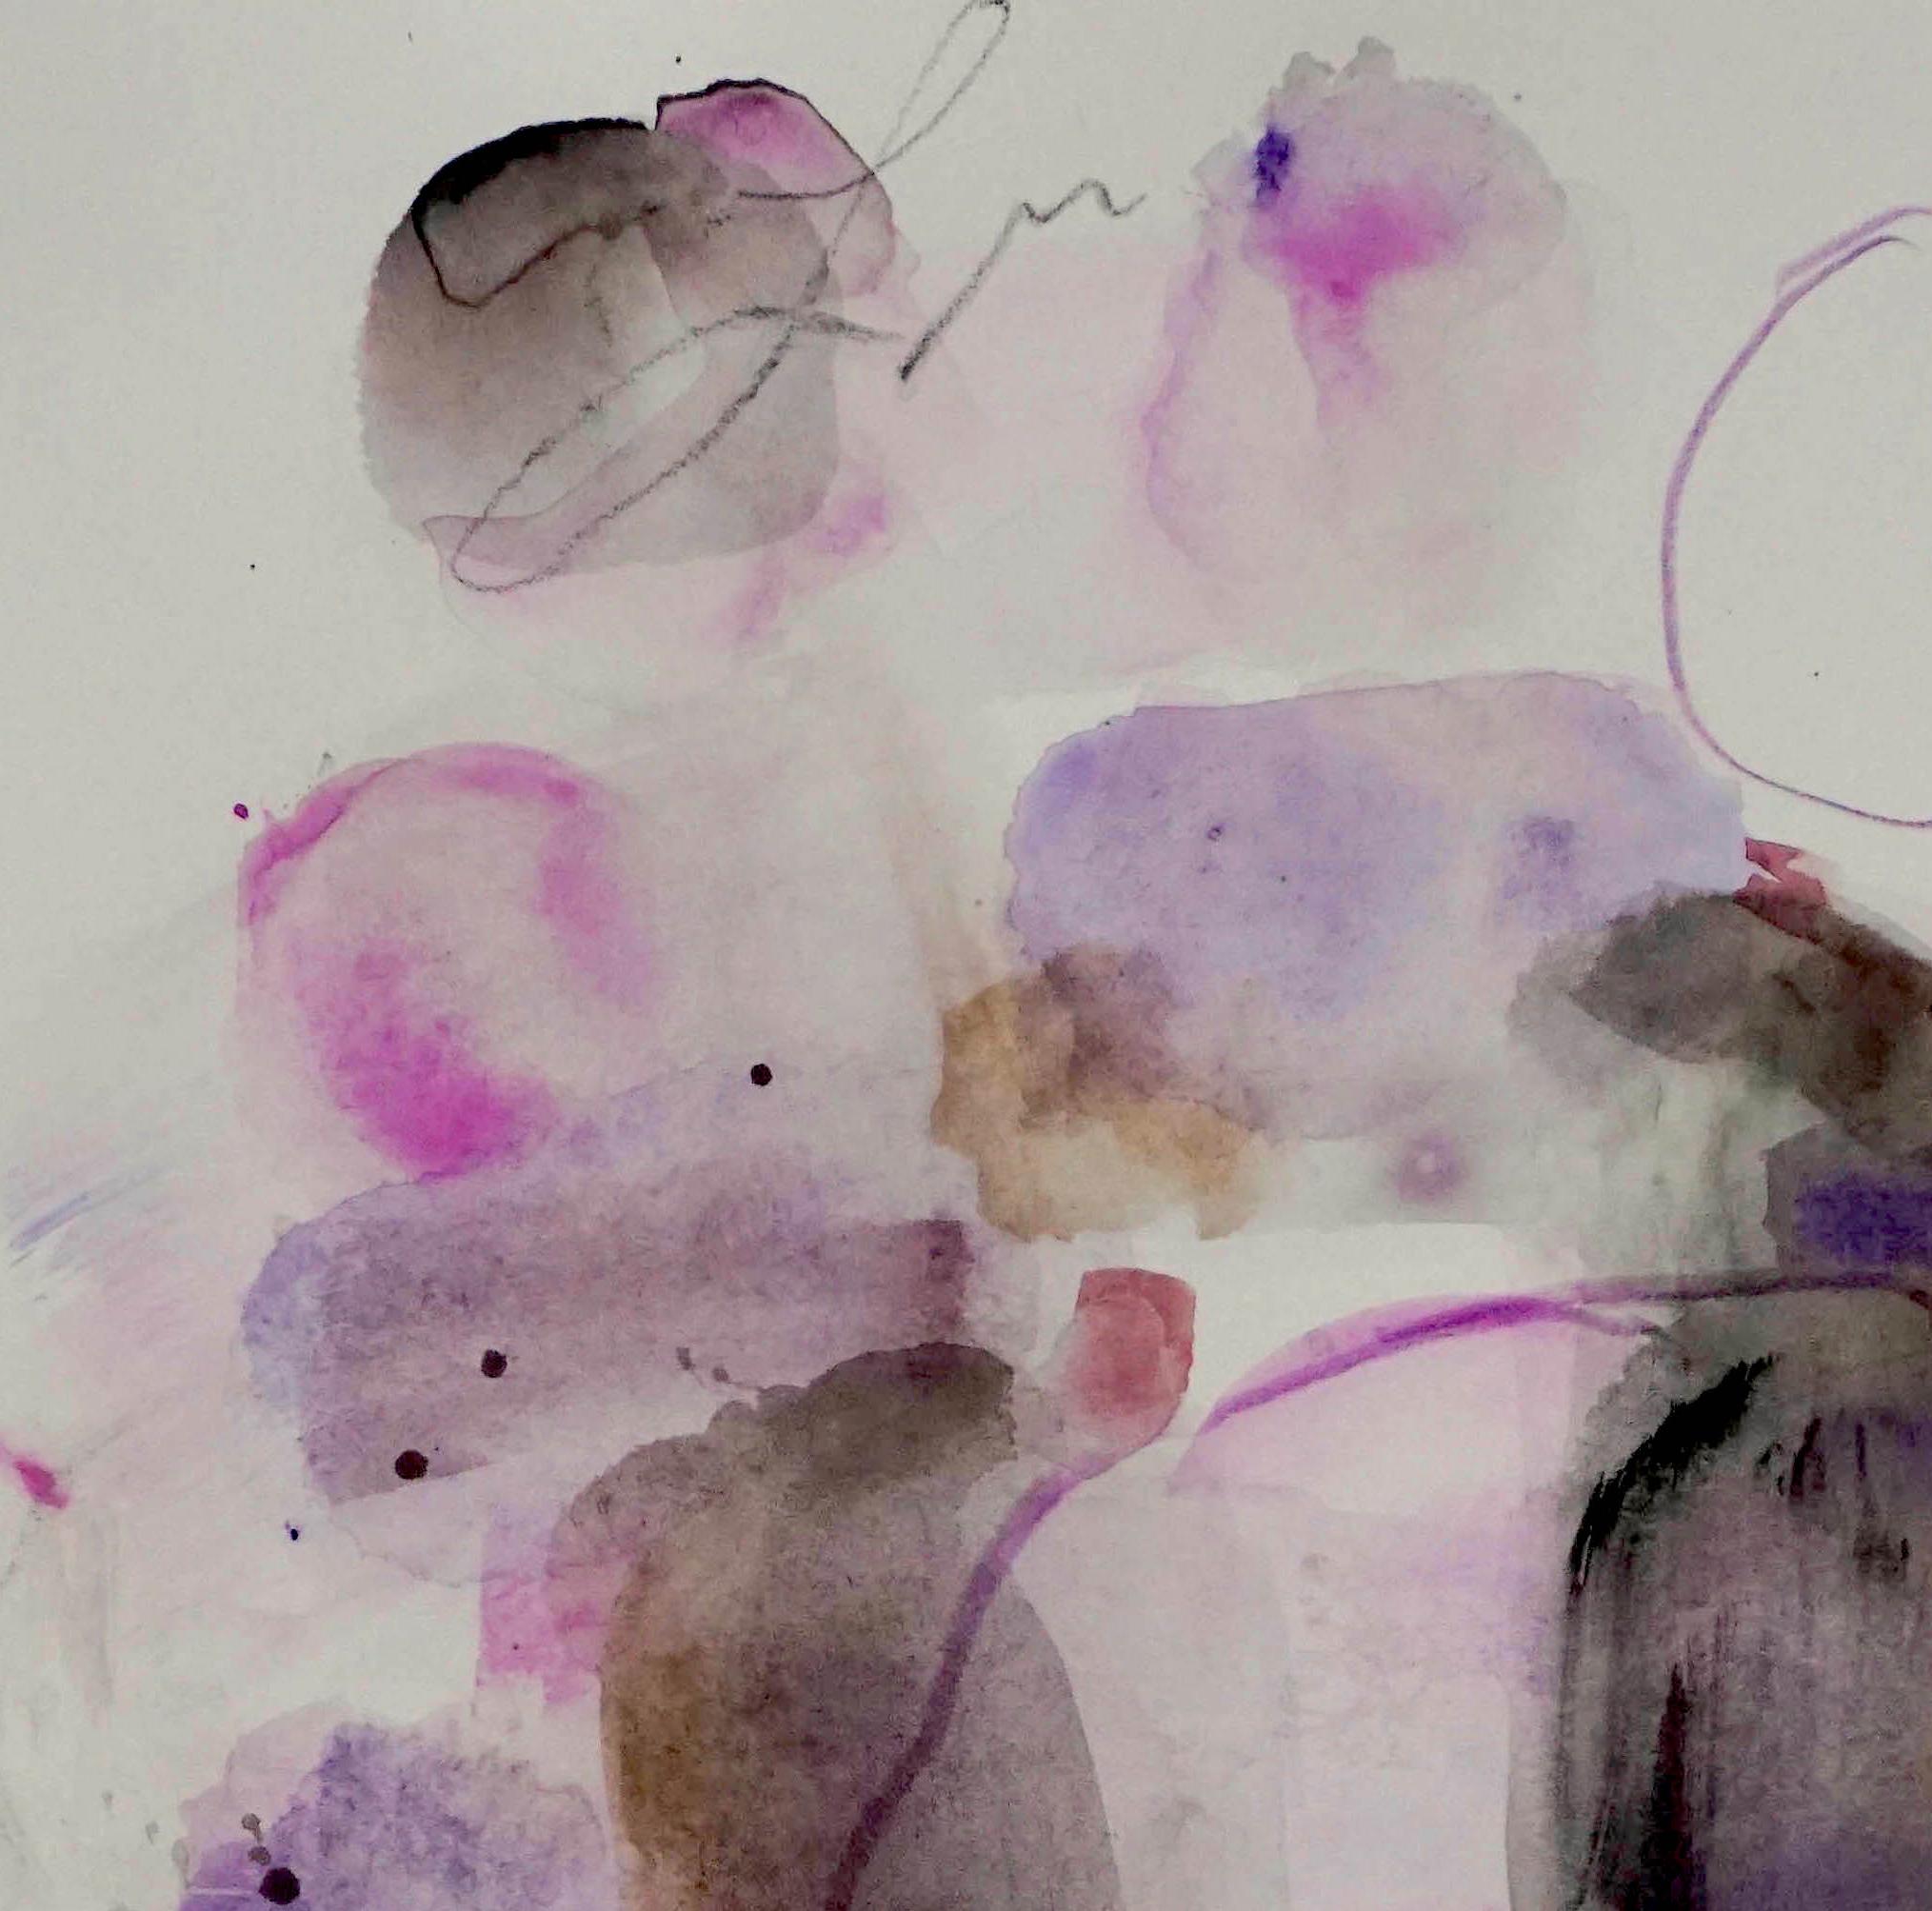 Watercolor on archival cold press paper.

Lisa Fellerson’s paintings provoke an interplay and tension between line, shape, and color. With no preconceived idea in mind, she begins by dripping, scrapping, and gouging acrylic paint on a